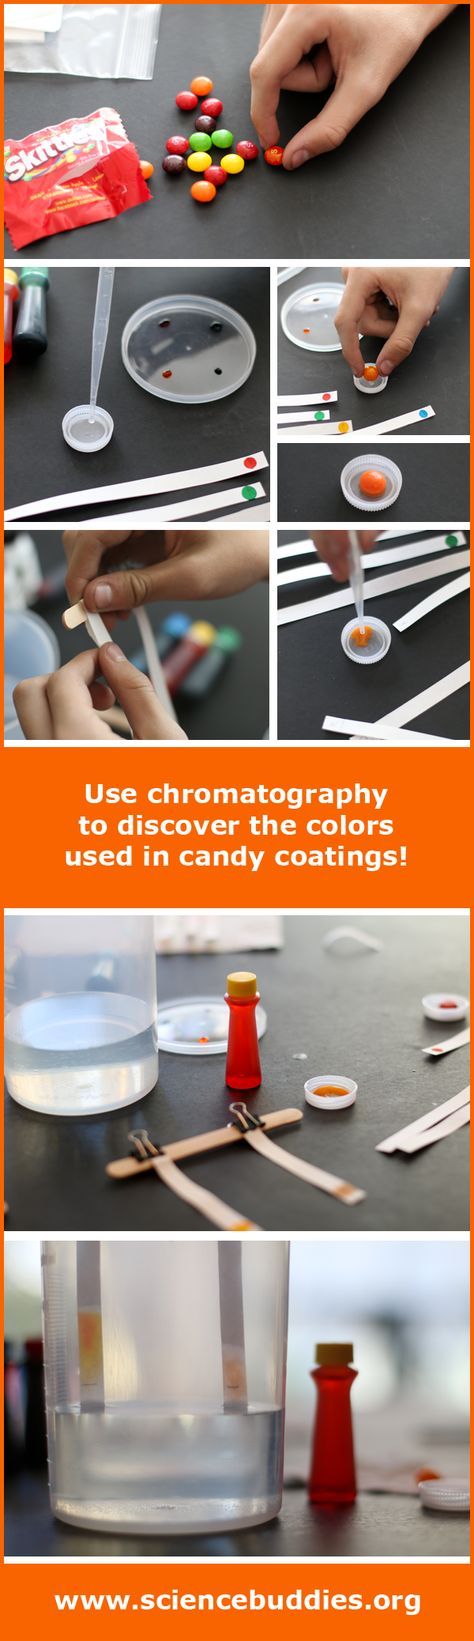 Candy Color Chromatography | Science Buddies Blog